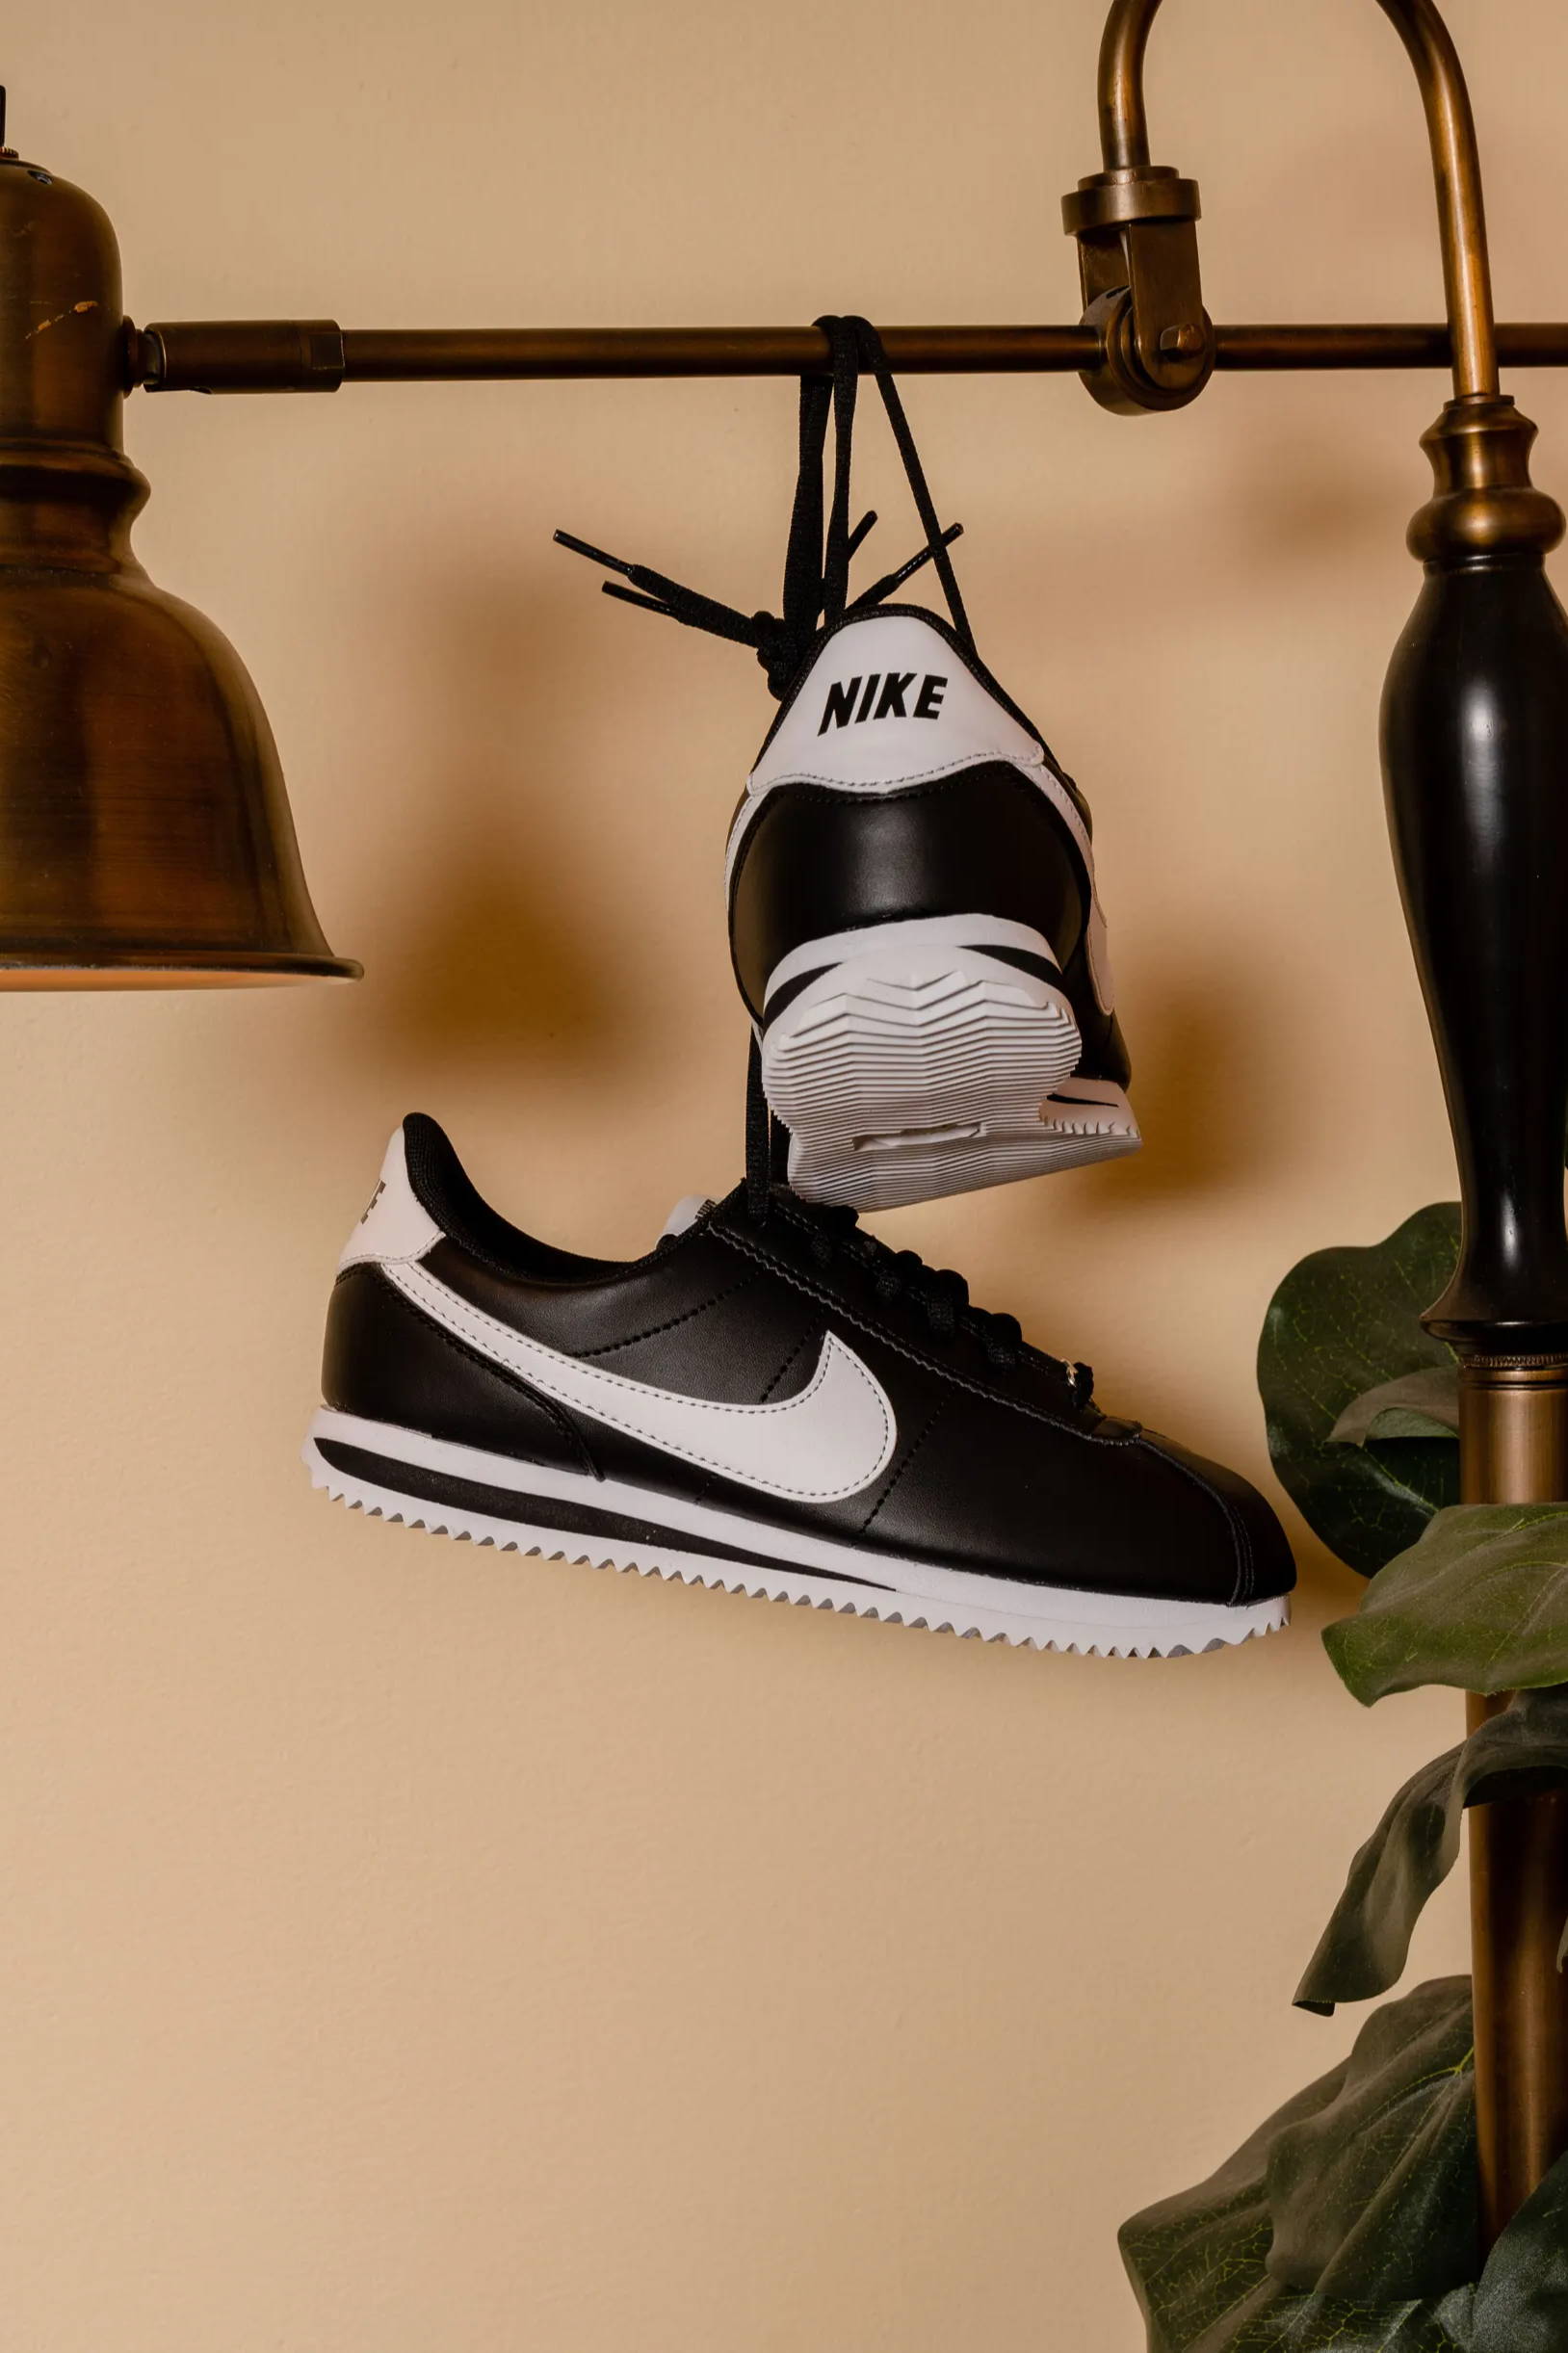 Manual equipaje uno The History of the Nike Cortez | Shoe Palace Blog